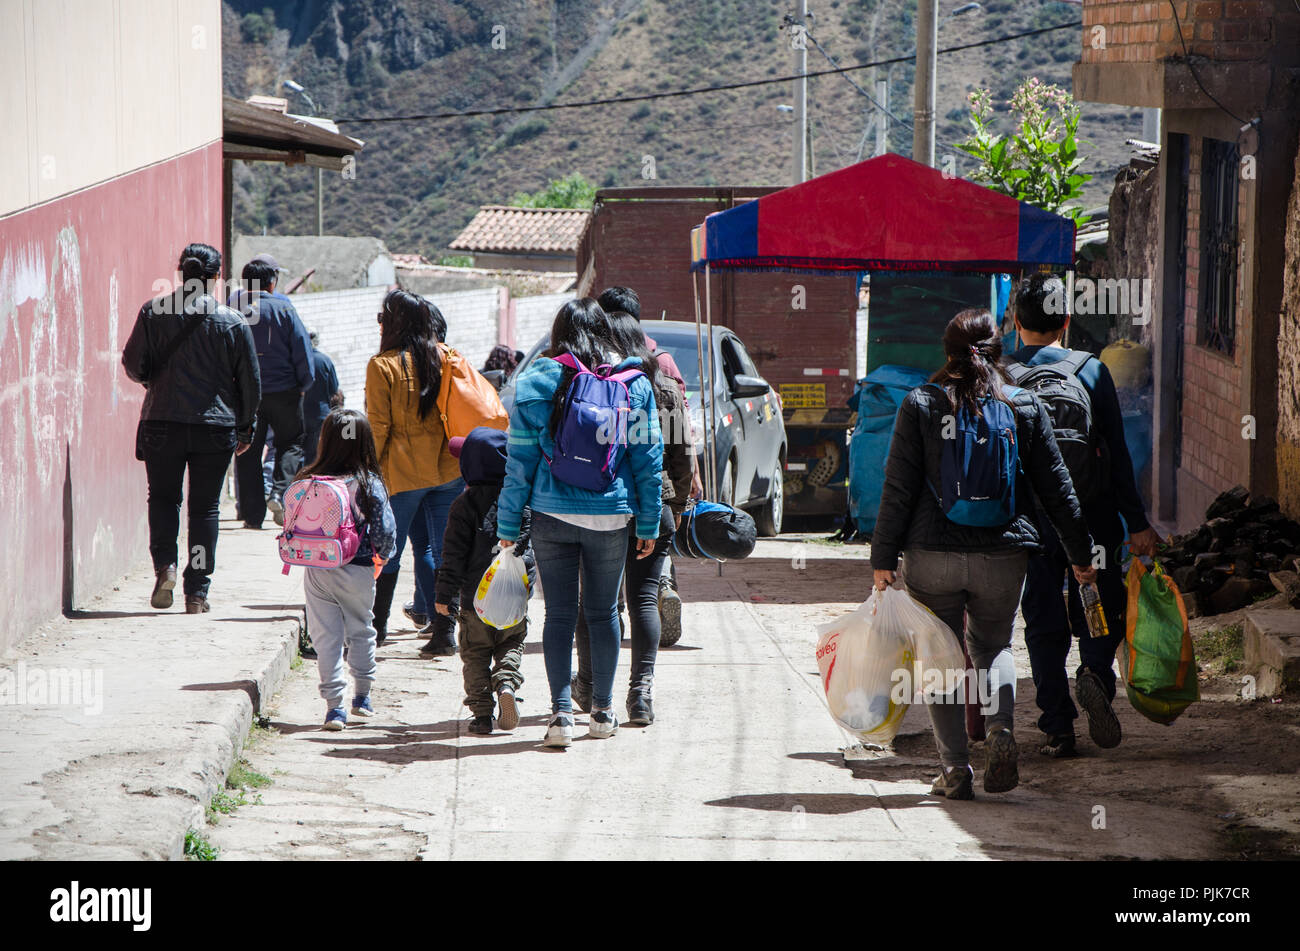 Lima, Peru - JULY 27th 2018 : Patriotic festivities in city of Canta. Tourists from Lima arriving for the patriotic festivities of July 28 Stock Photo